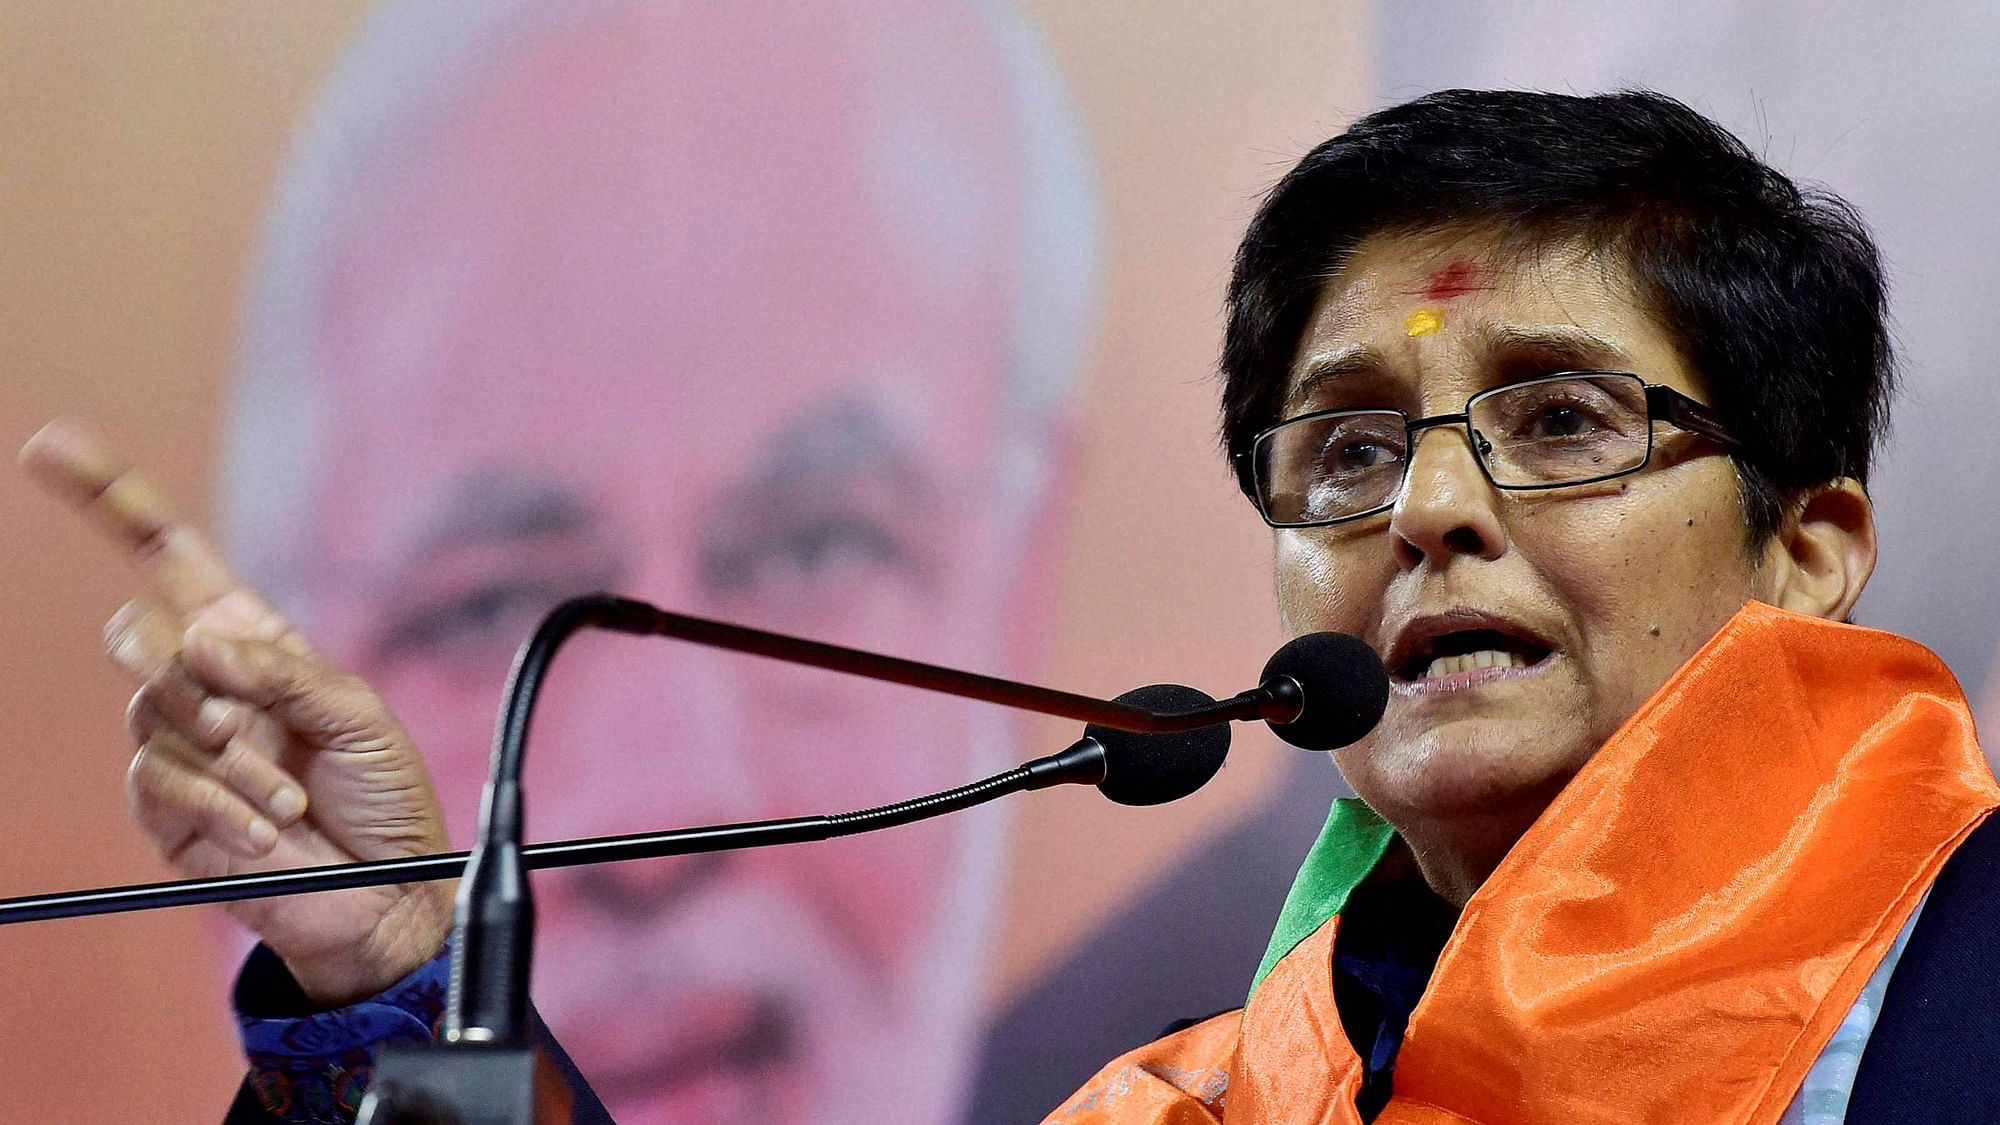 File photo of former IPS officer and BJP leader Kiran Bedi. (Photo: PTI)